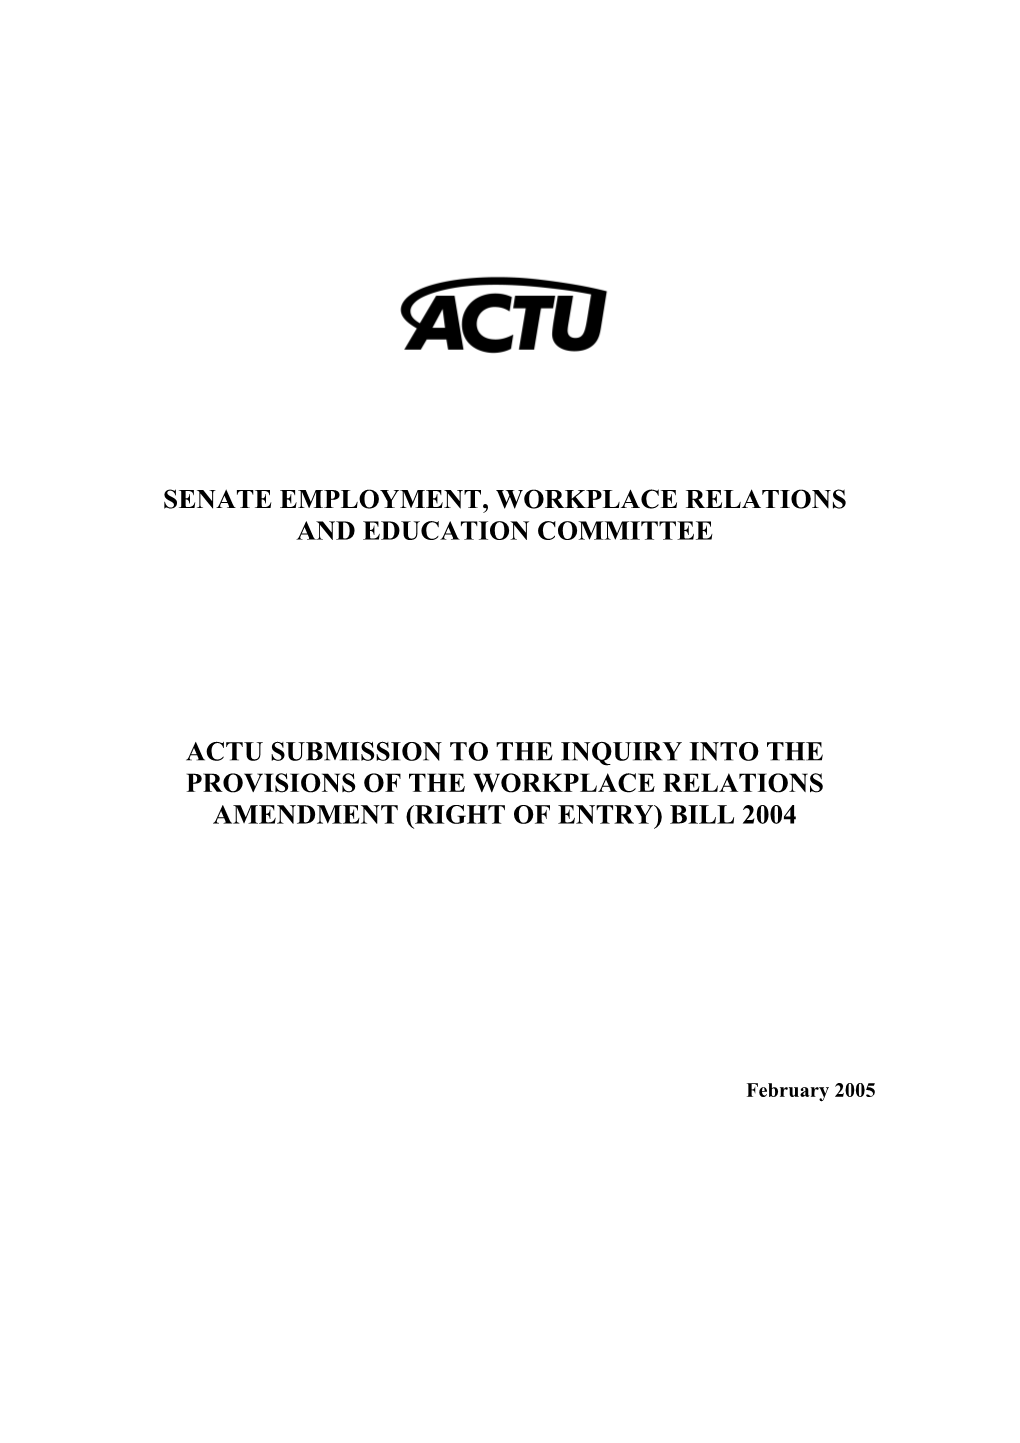 Senate Employment, Workplace Relations and Education Committee